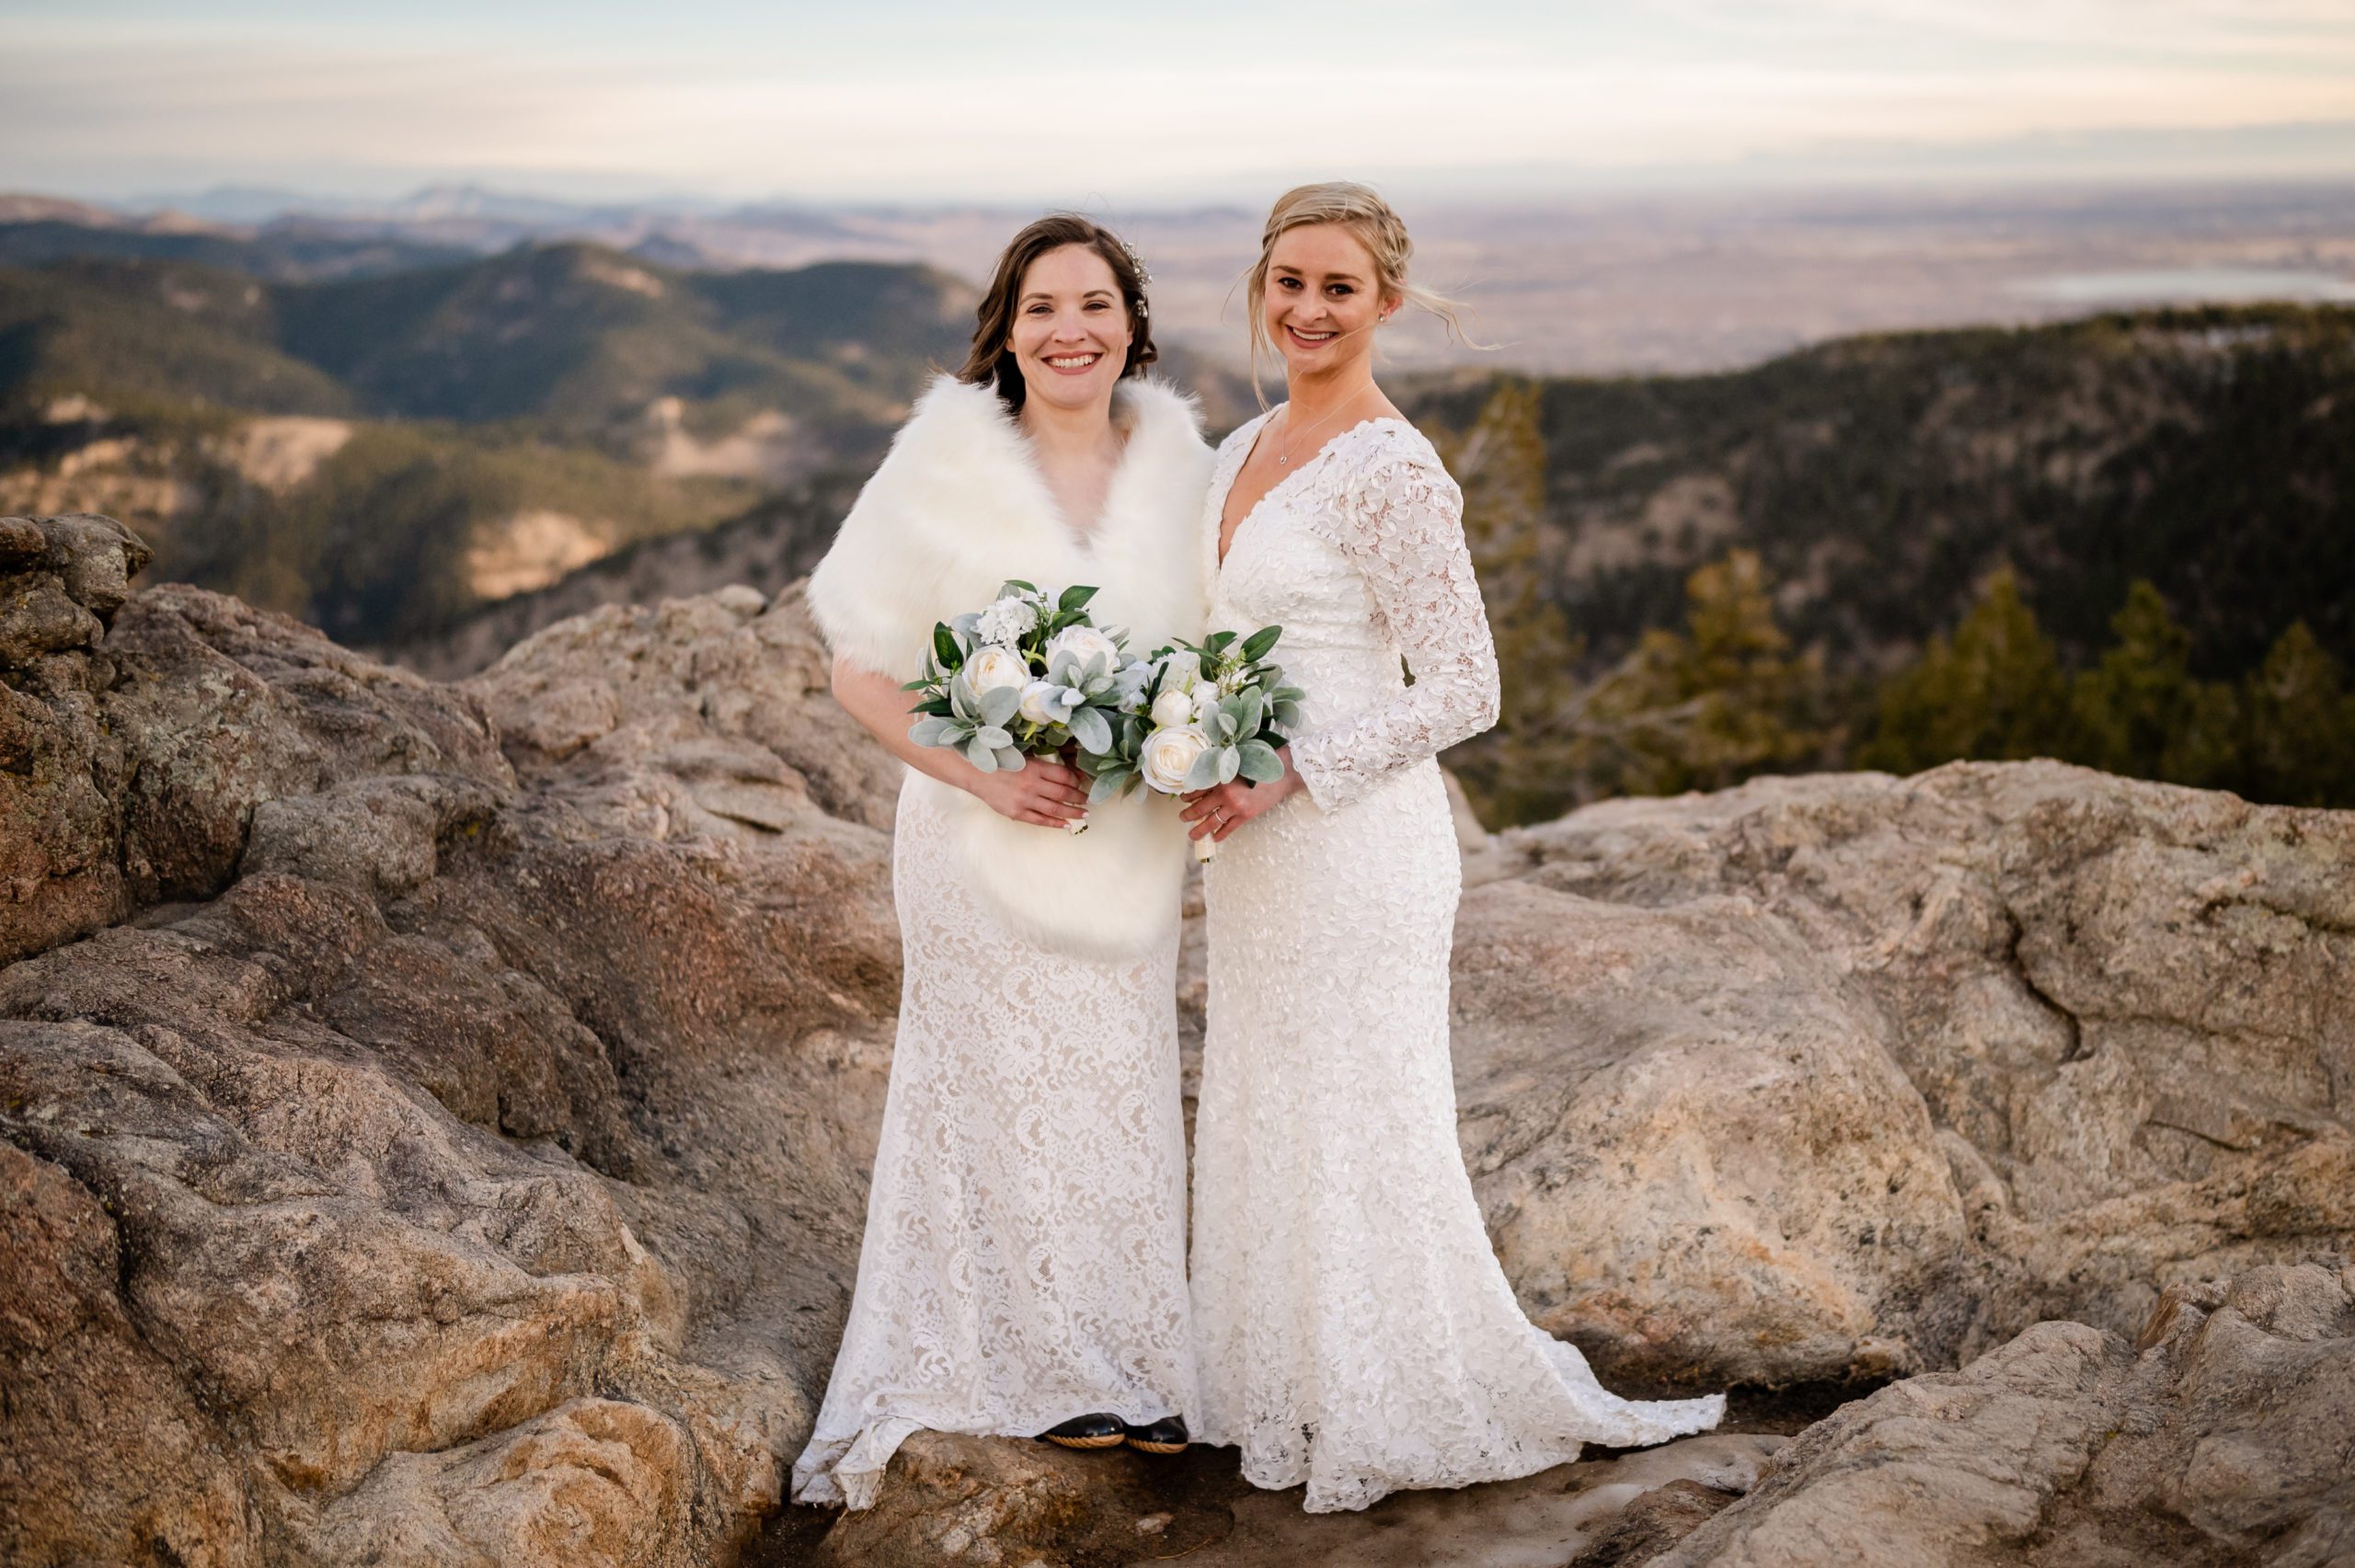 The bride's holding beautiful bouquets at their Lost Gulch elopement.